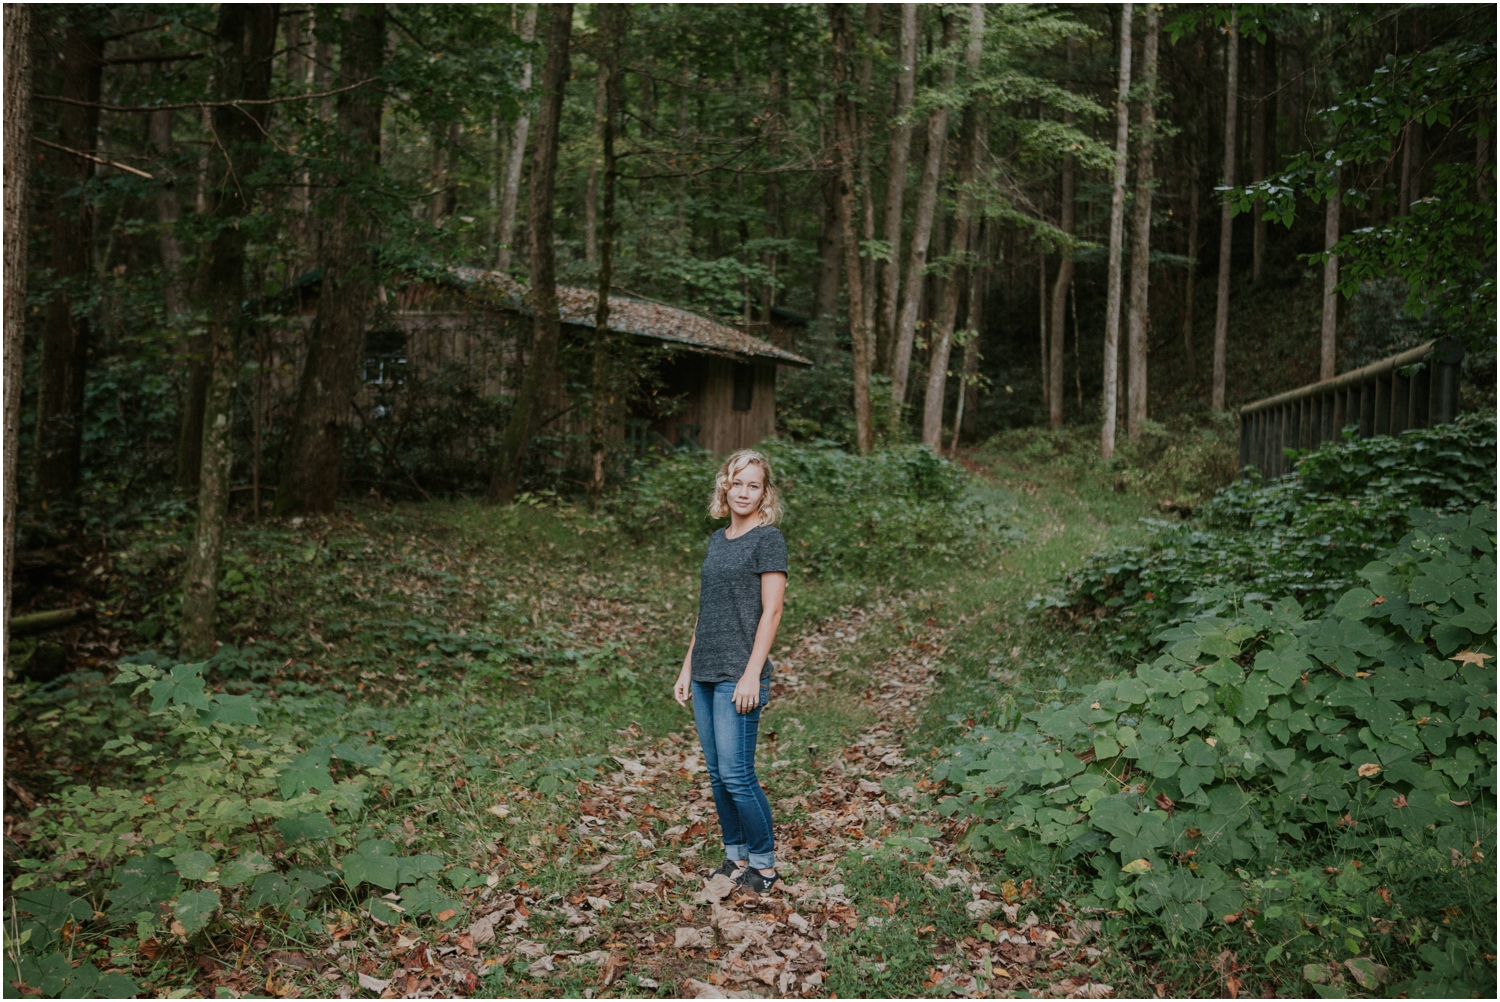 She helped me scout locations and test the light for an upcoming wedding at the Camp at Buffalo Mountain!